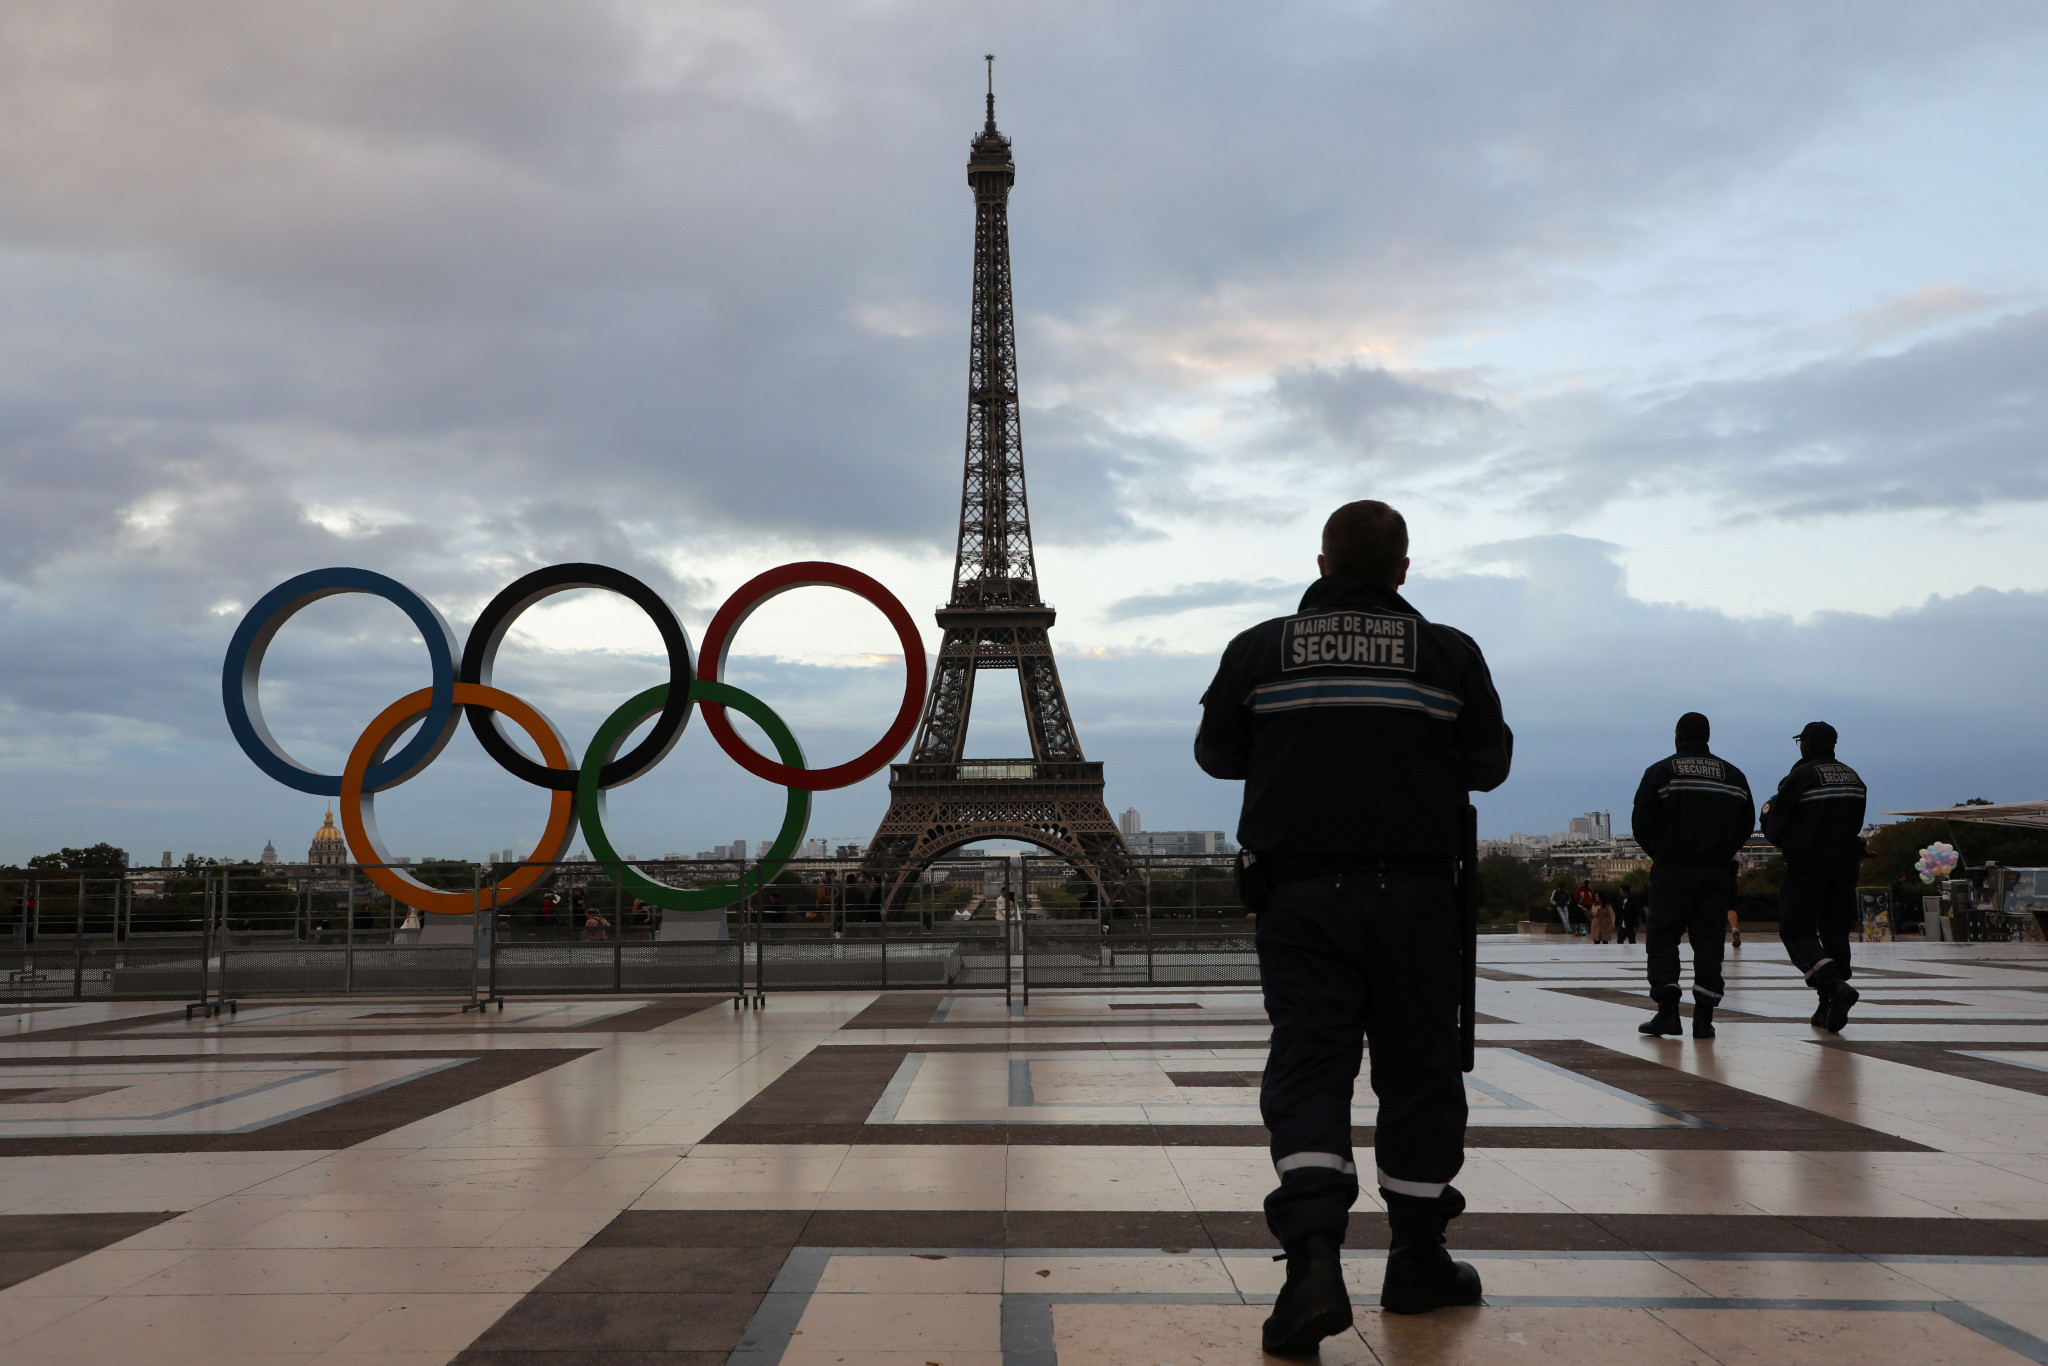 Twenty thousand security guards are needed for Paris 2024 ©Getty Images